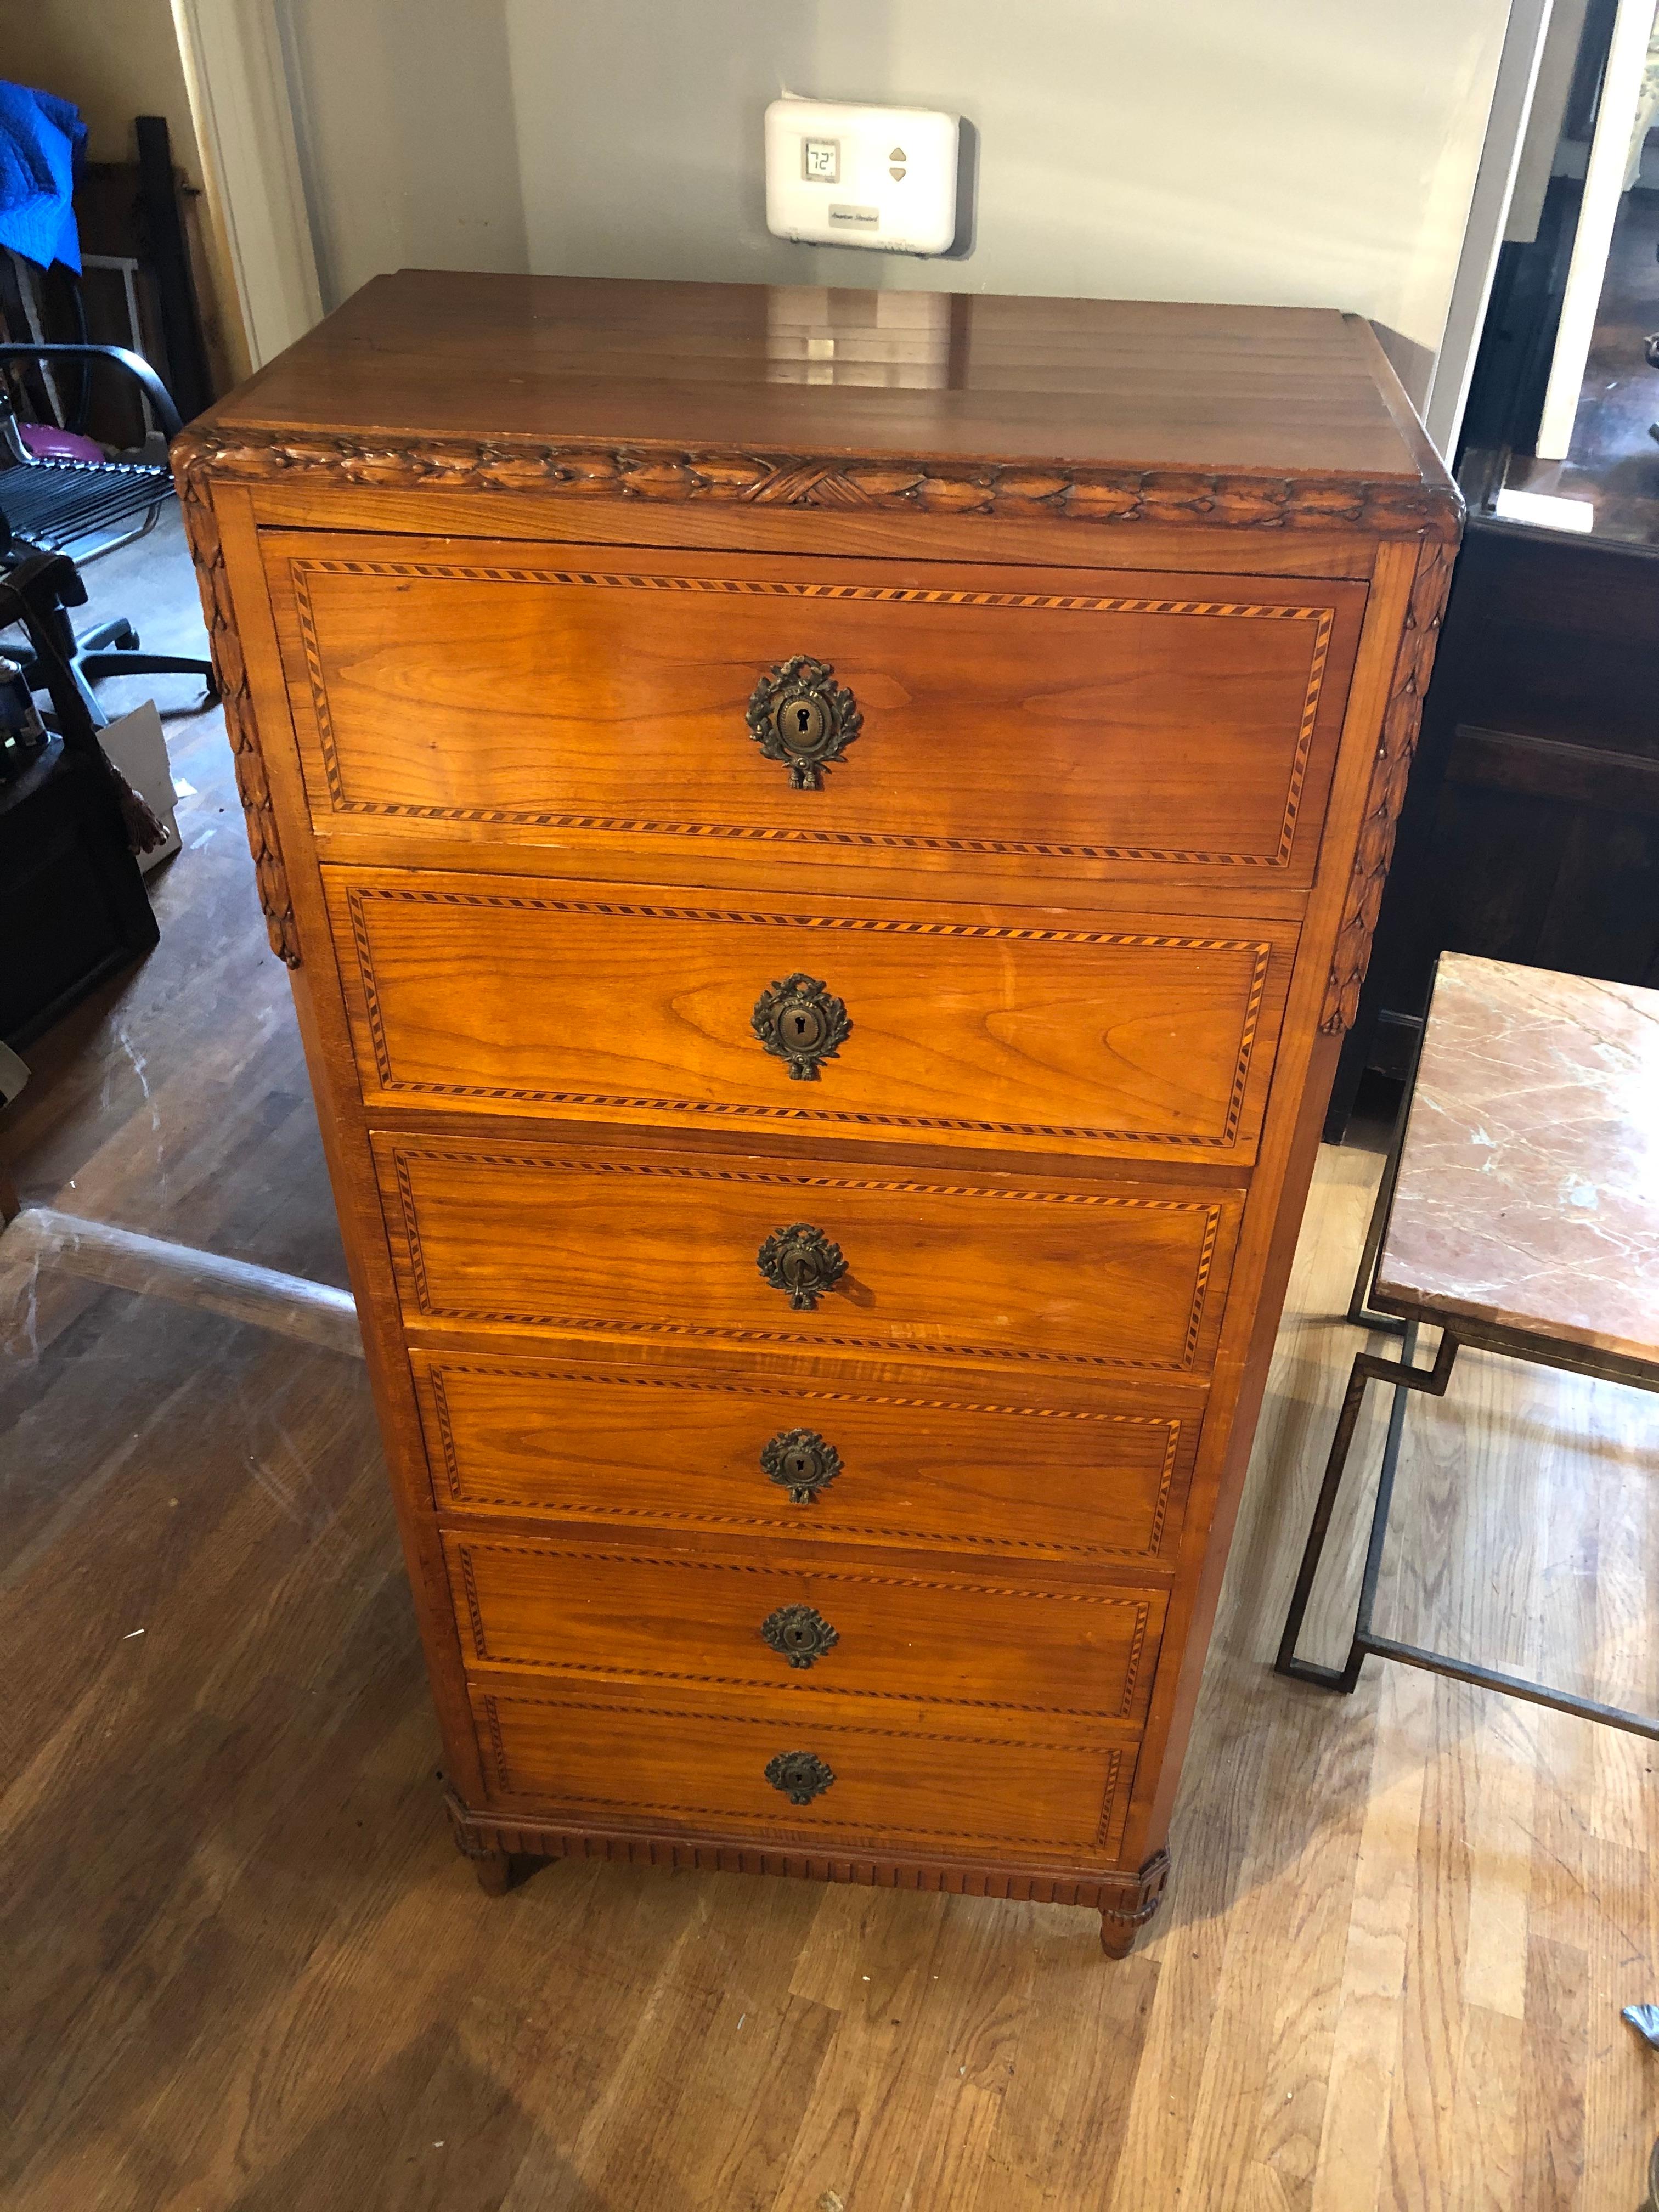 Louis XIV style French Provincial lingerie chest made of beautifully patinated pear wood with boxwood and king wood inlaid geometric decoration. Excellent proportions with six drawers that open by key with carved leaf decoration and the original